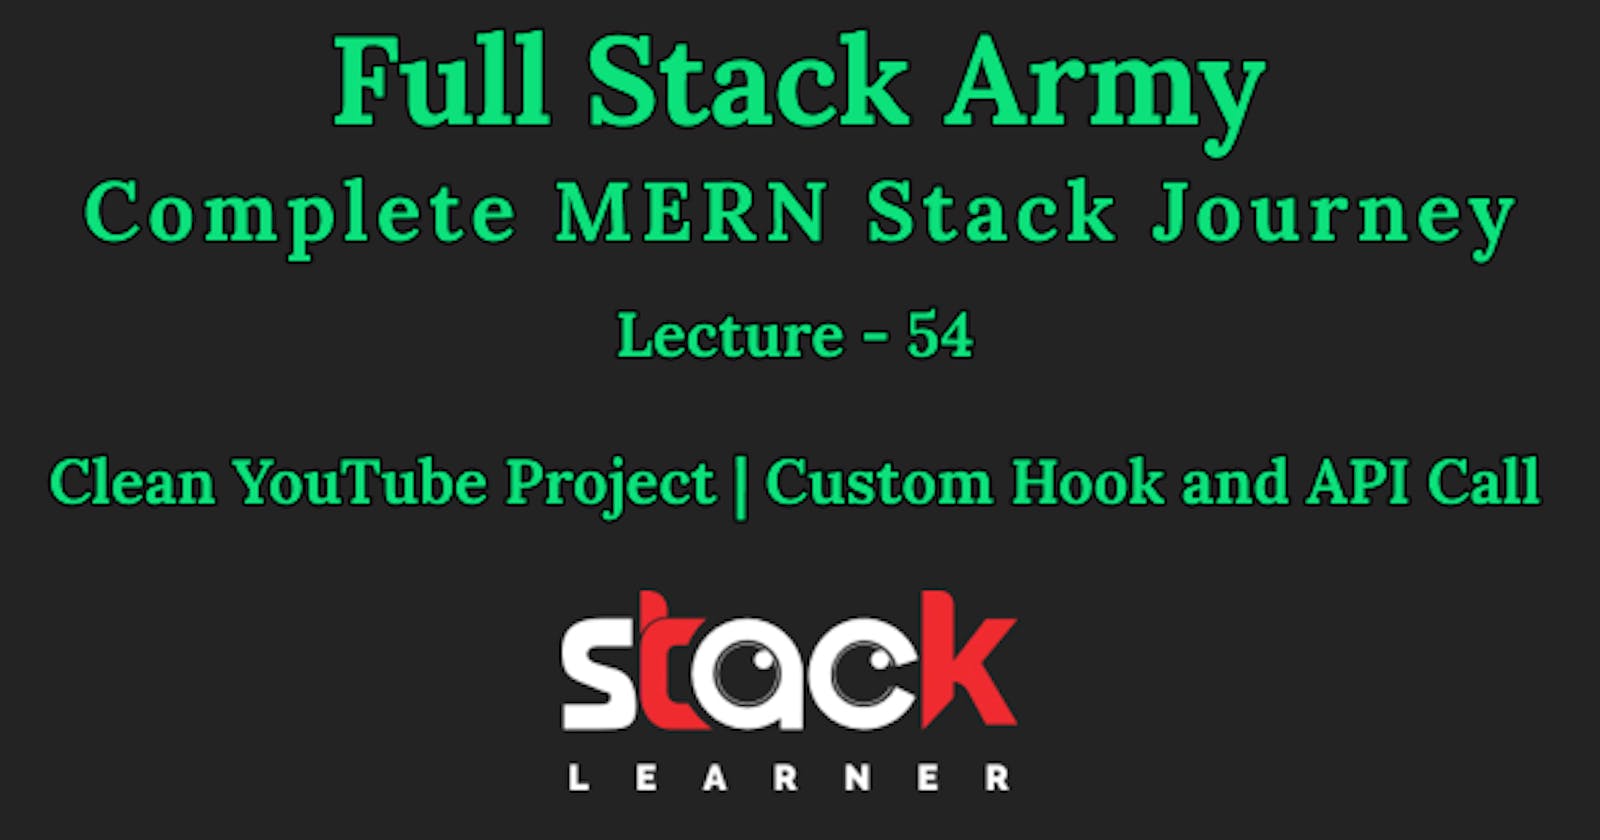 Lecture 54 - Clean YouTube Project | Custom Hook and API Call